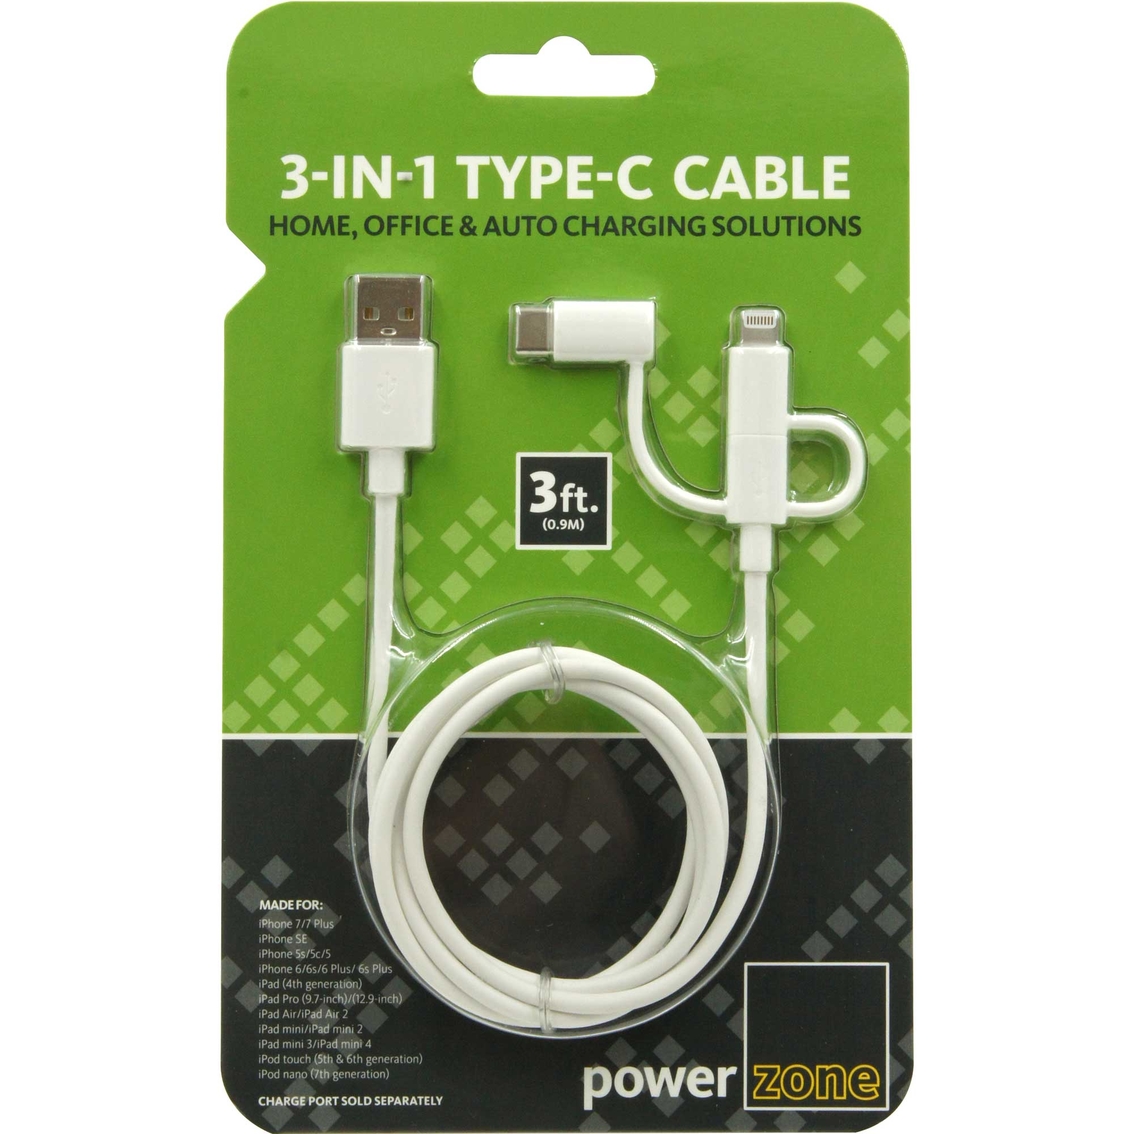 Powerzone 3-in-1 Type C Cable 3 ft. - Image 4 of 5